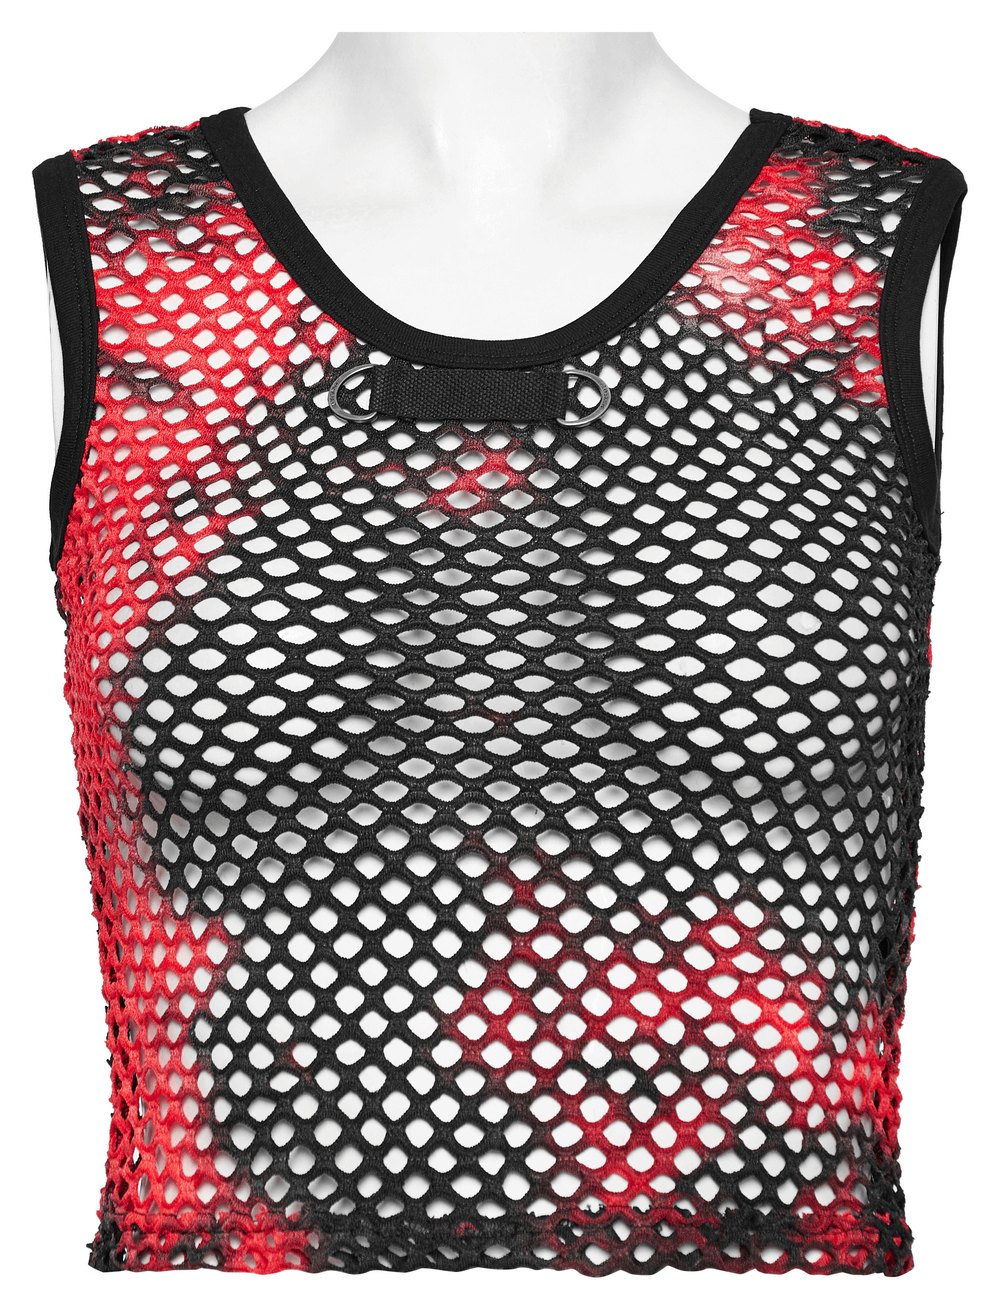 Stylish Red and Black Tie Dye Mesh Crop Tank Top